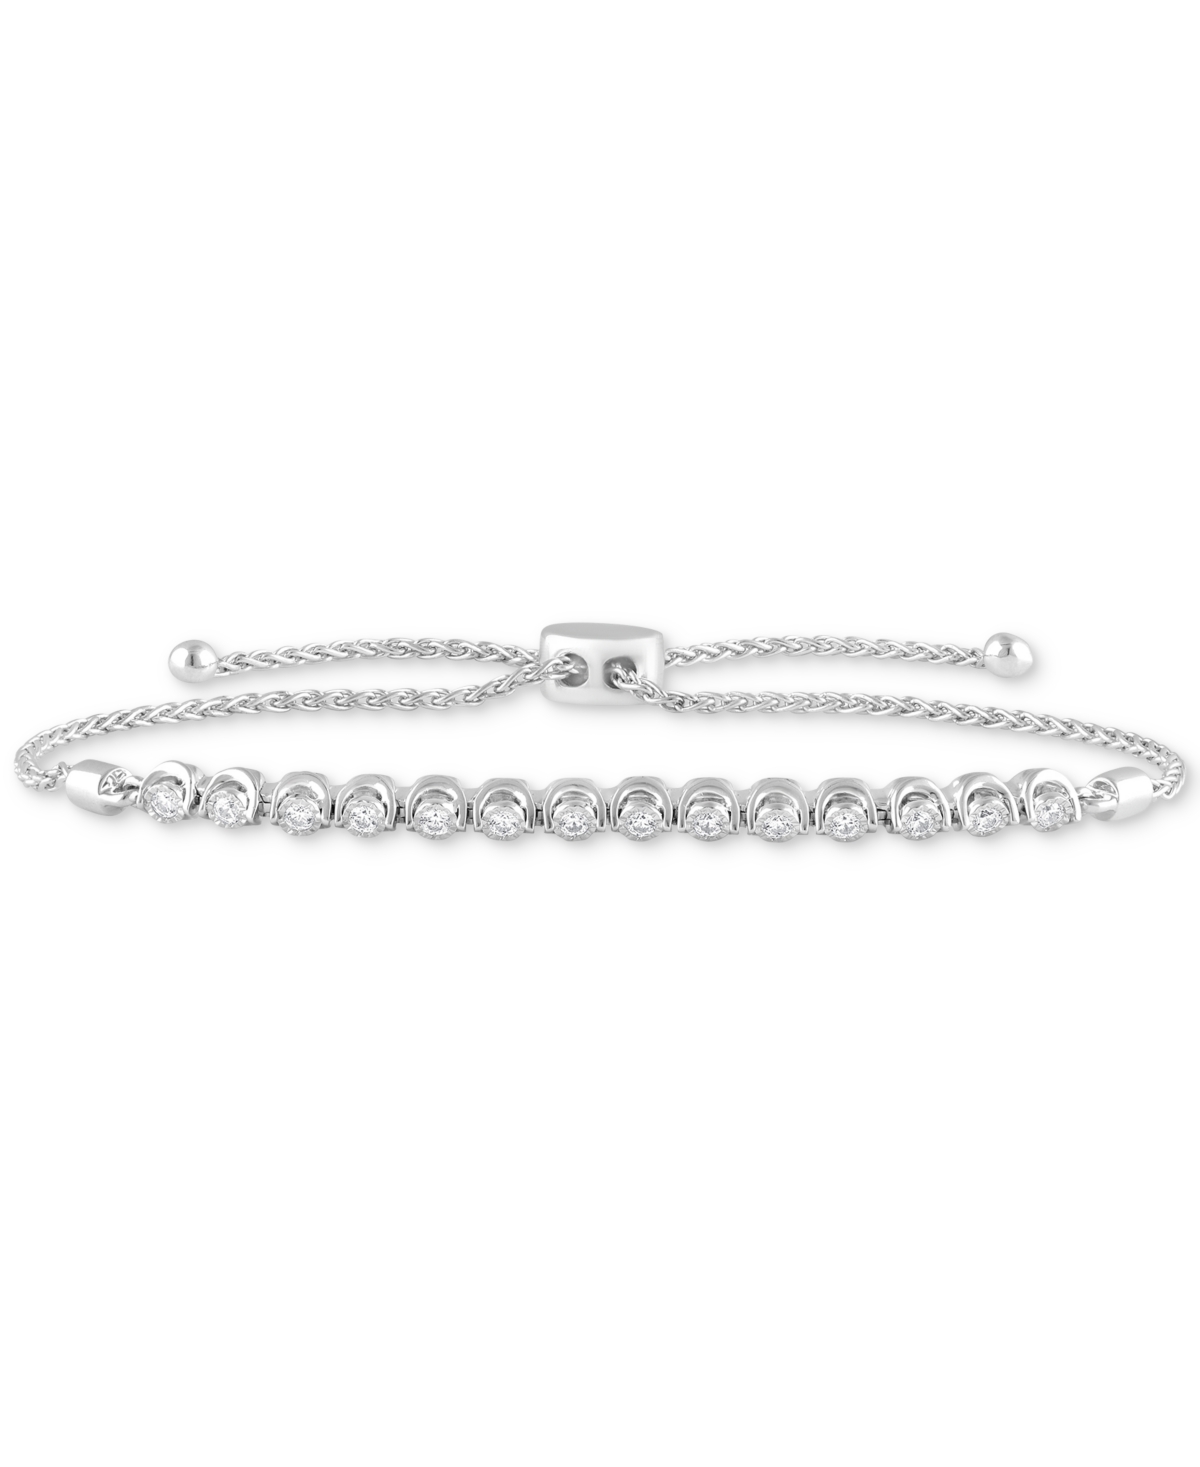 Lab-Created Diamond Bolo Bracelet (1/4 ct. t.w.) in Sterling Silver - Sterling Silver